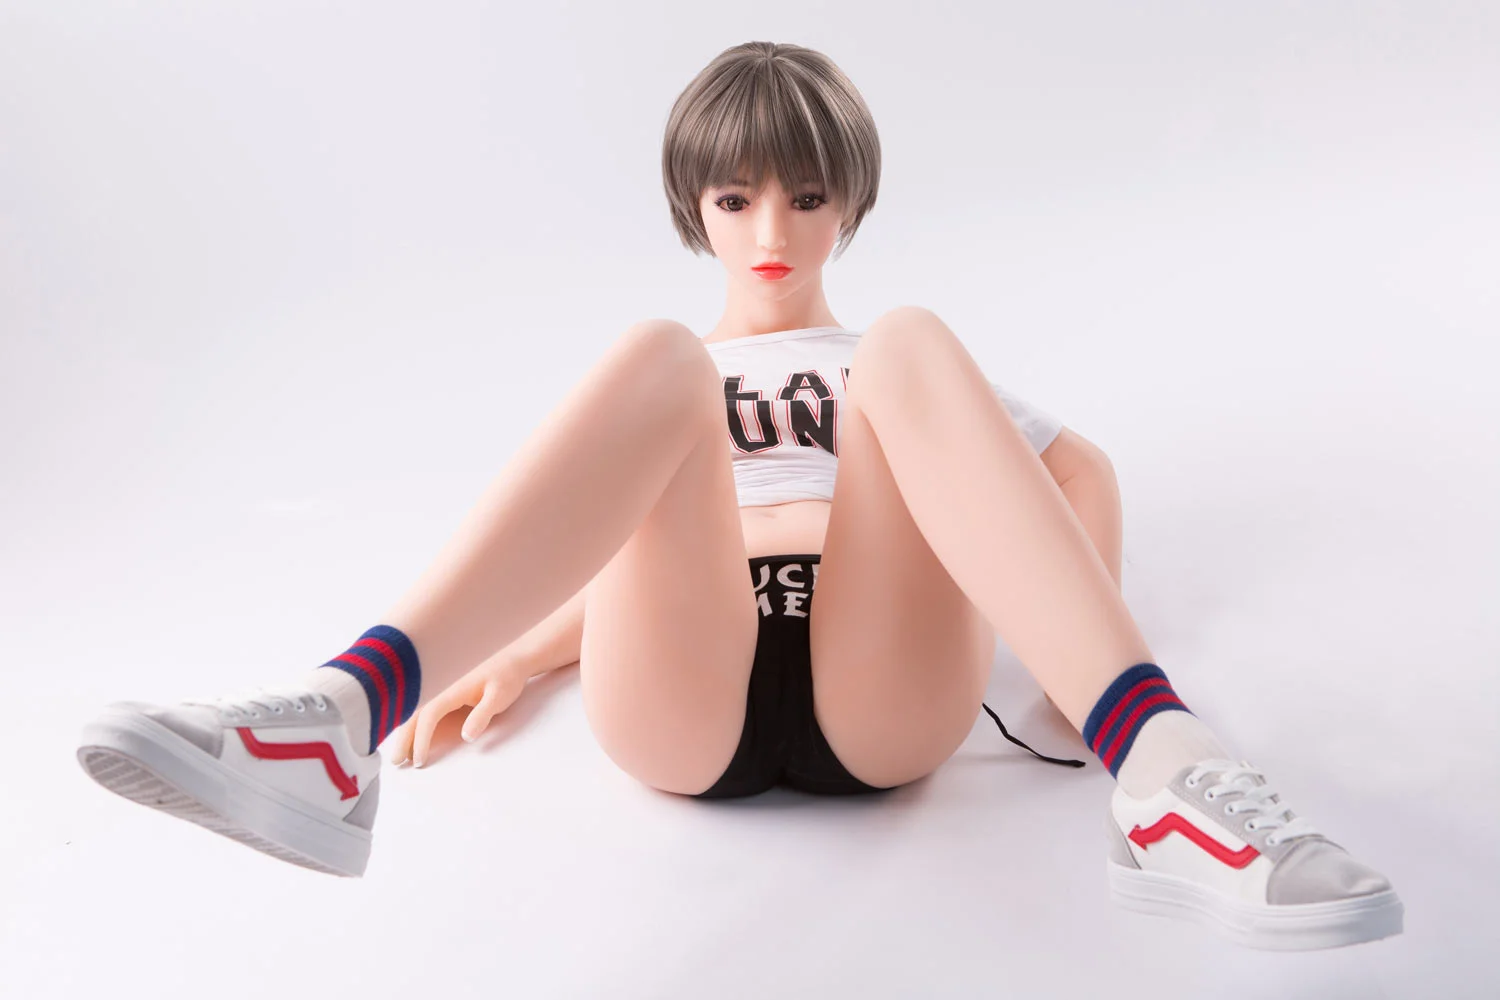 A mini sex doll lying on the ground with open legs